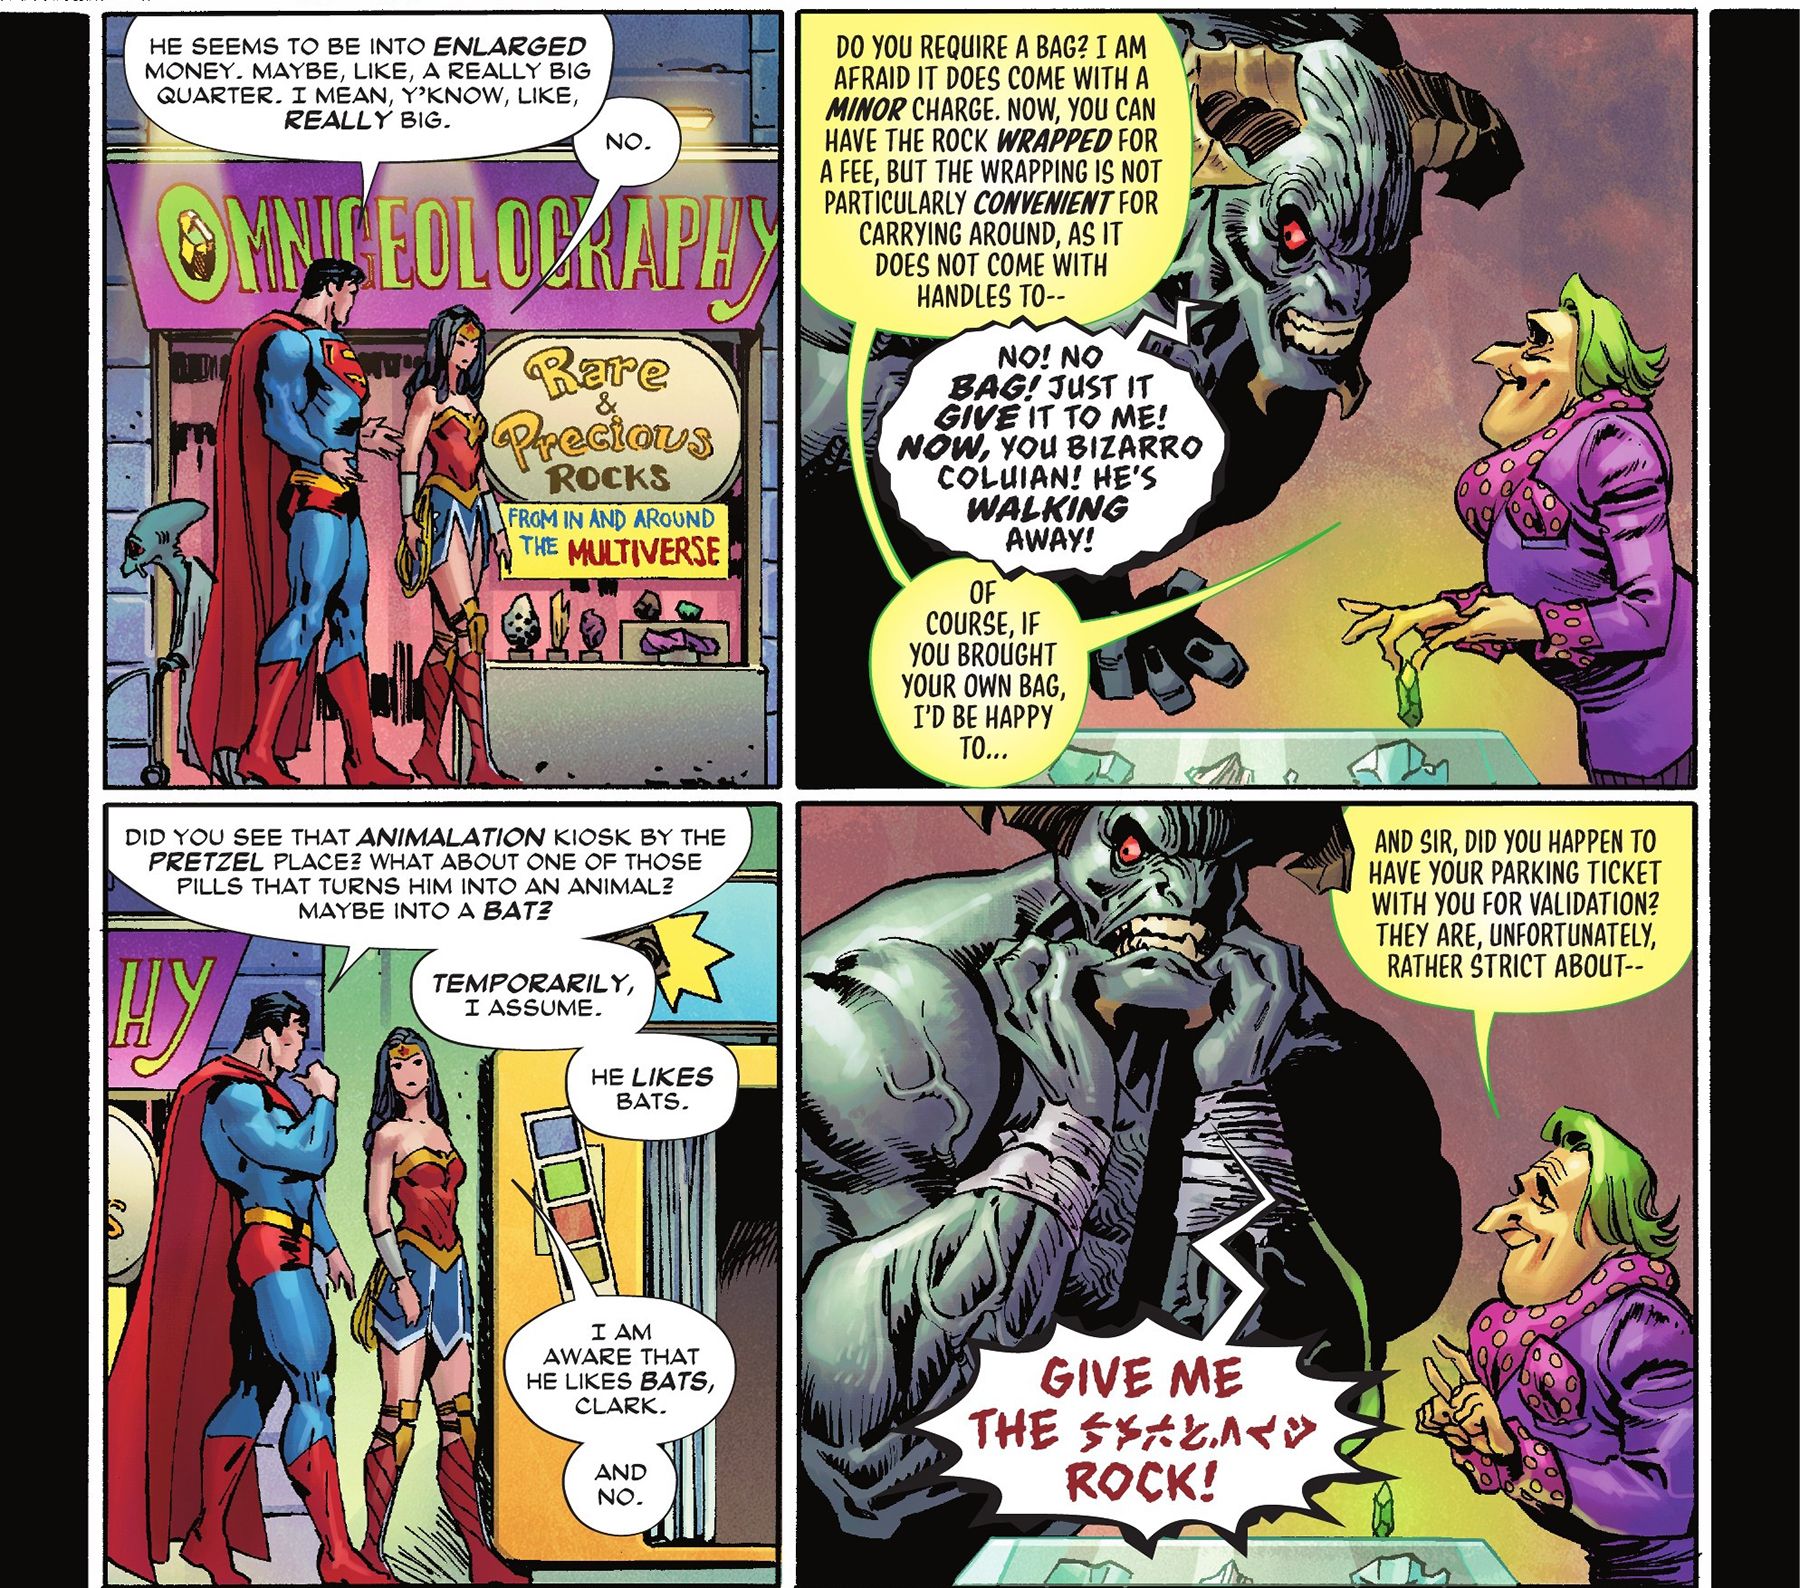 Wonder Woman and Superman shop for a birthday gift for Batman, as another alien tries to quickly buy Kryptonite so he can defeat Supes. The struggle is a Love Actually reference, with a retail worker offering extras like a shopping bag and gift wrap.